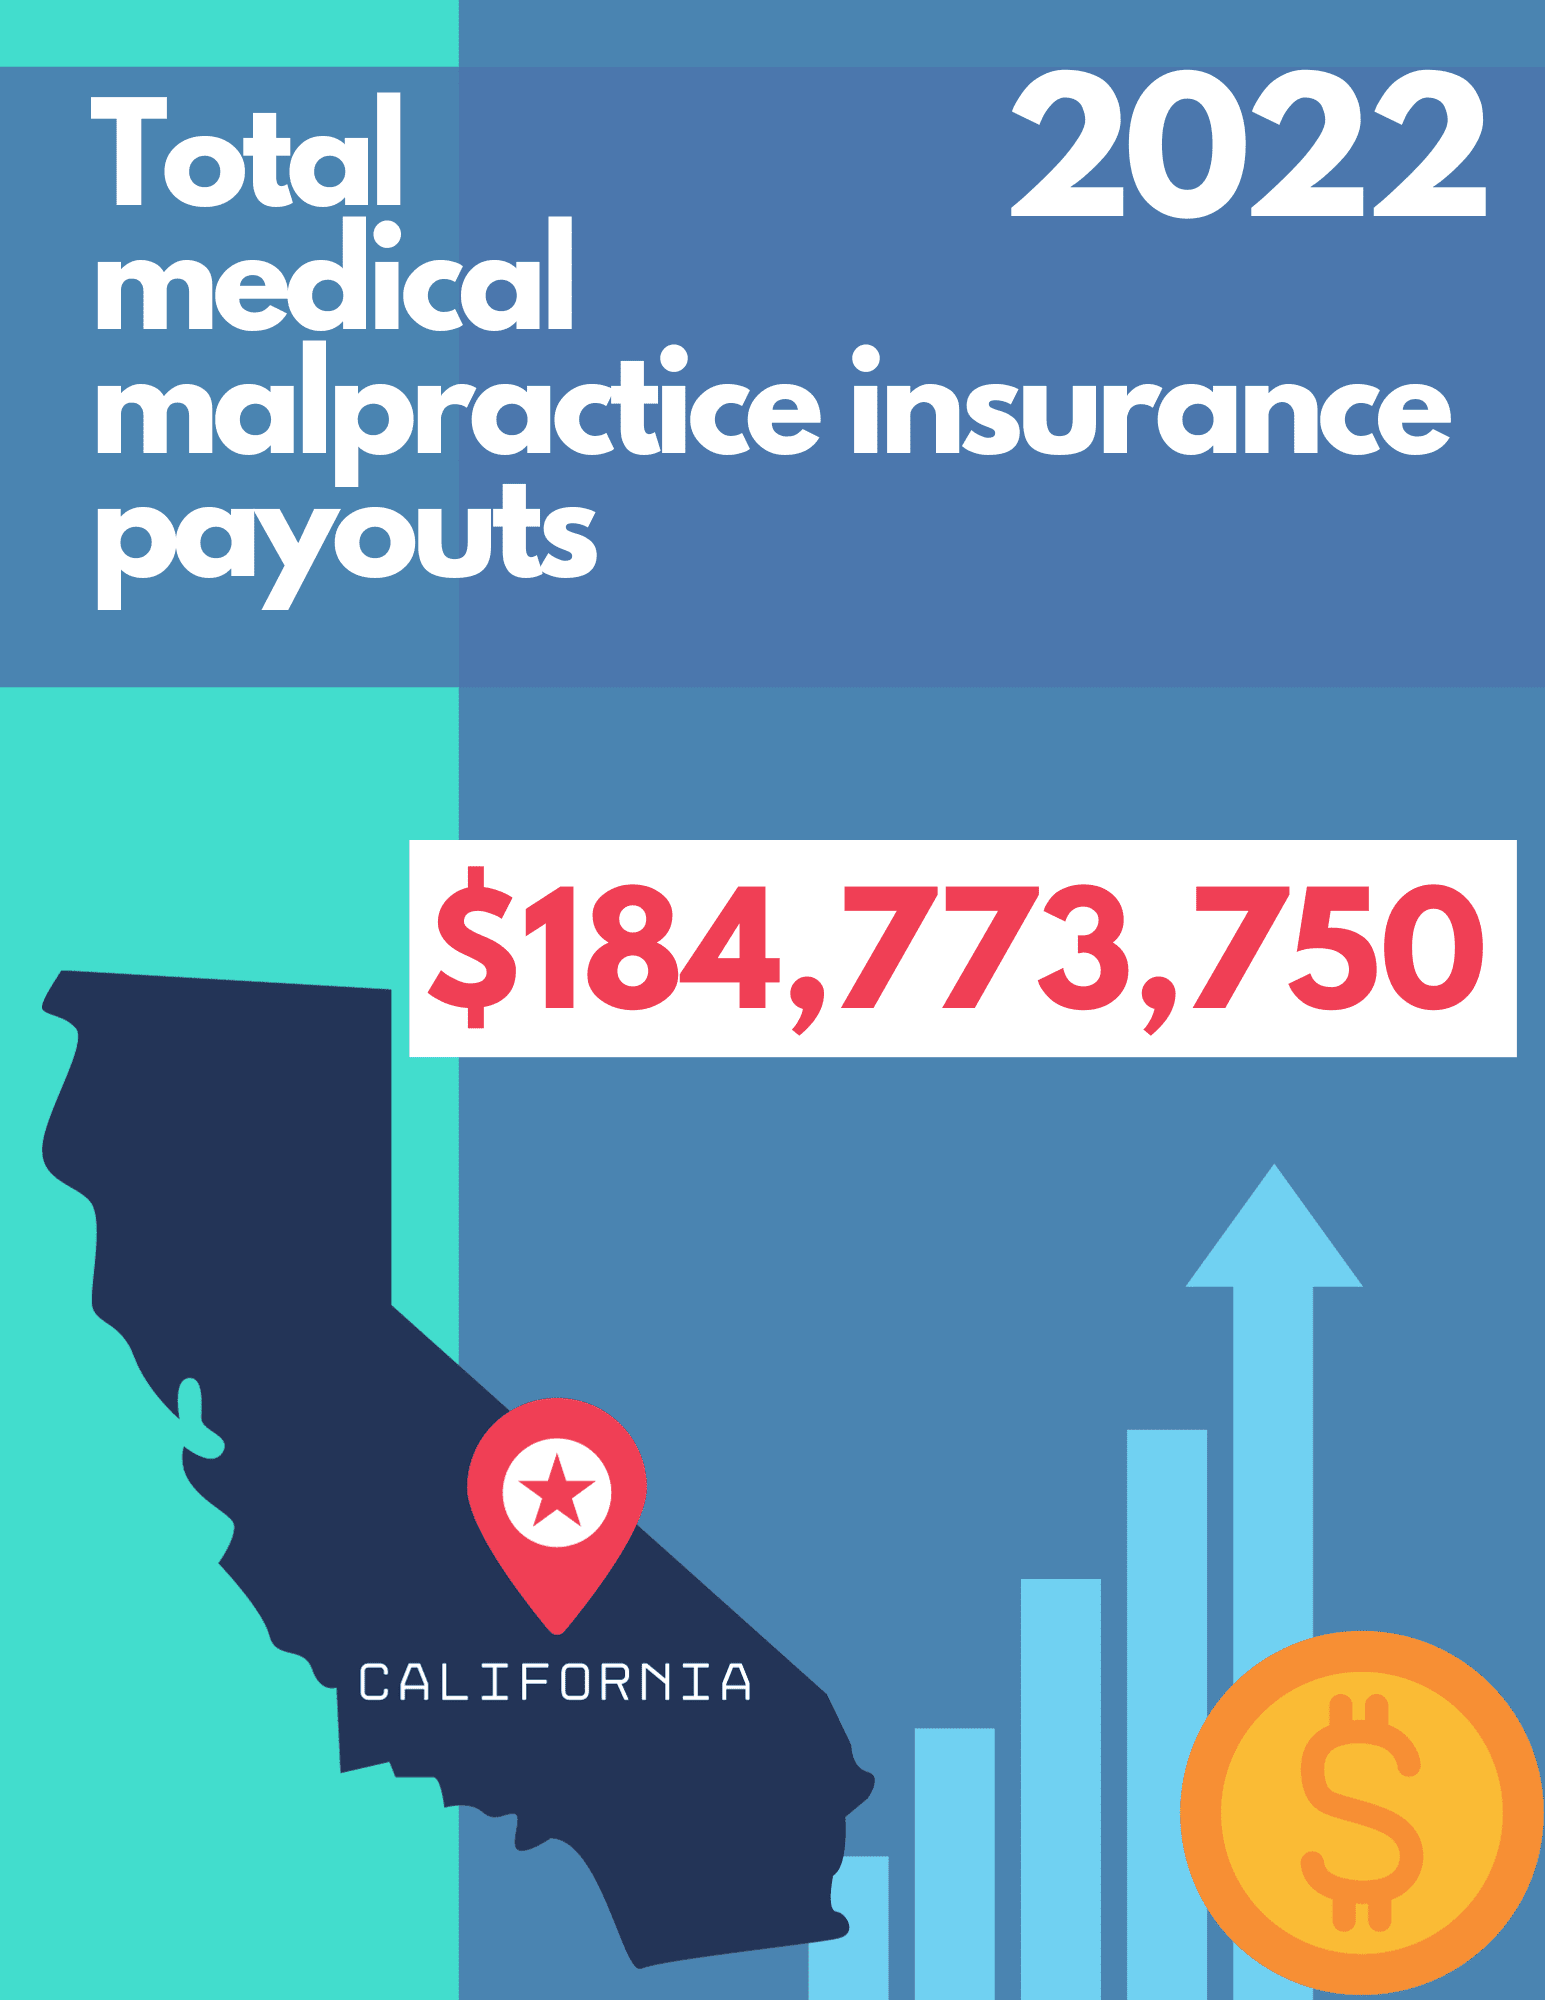 Total medical malpractice insurance payouts in 2022